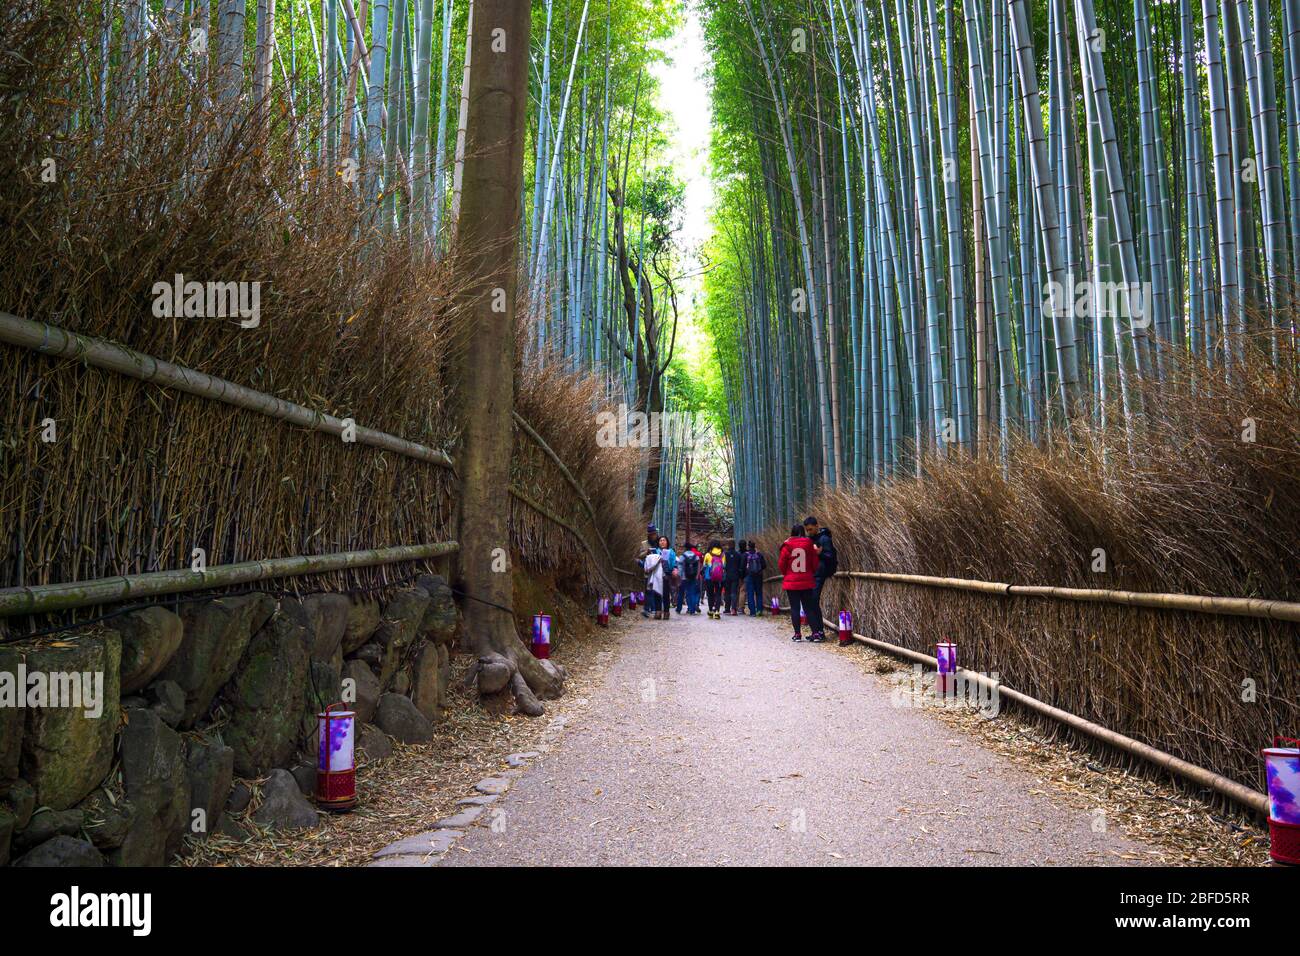 Arashiyama Bamboo Grove is the star attraction, standing amid these soaring stalks of bamboo is like being in another world. It's most breathtaking na Stock Photo